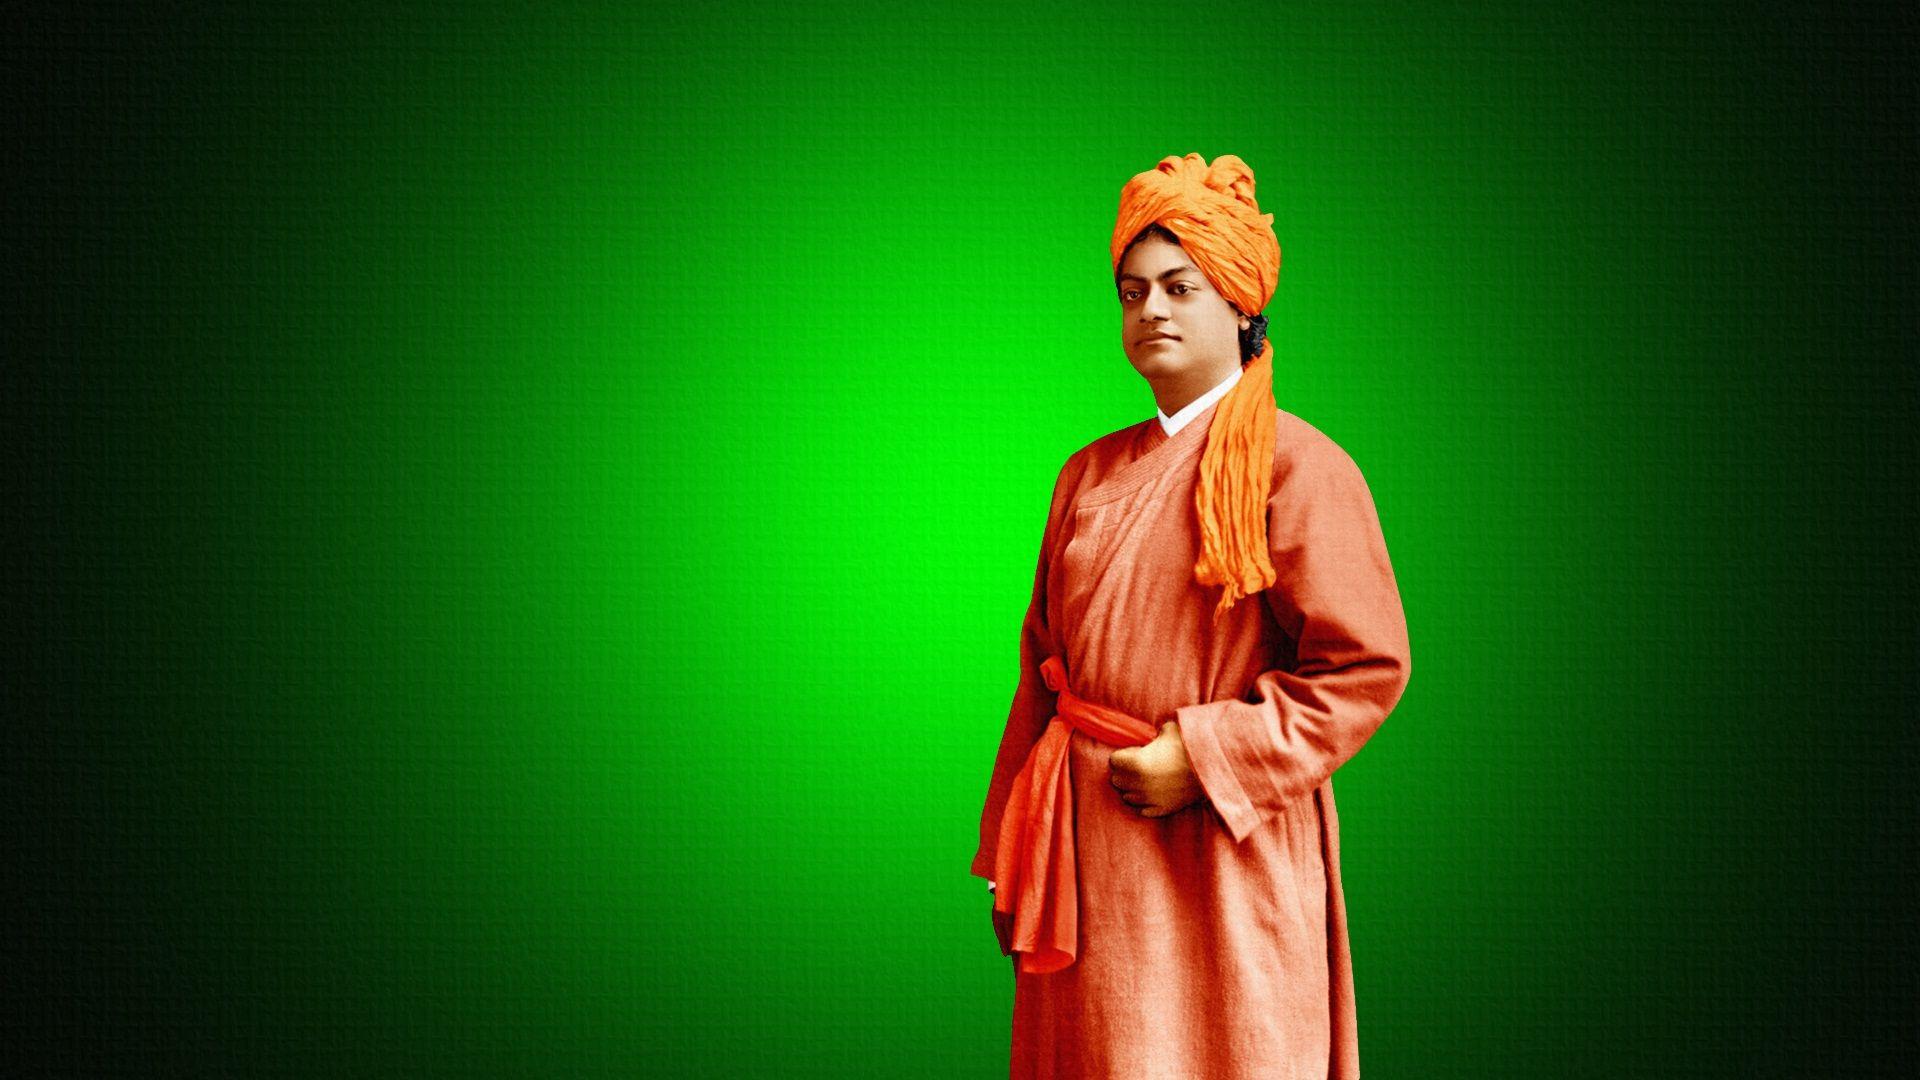 Full Hd Swami Vivekananda Png : You can find other gods and goddess